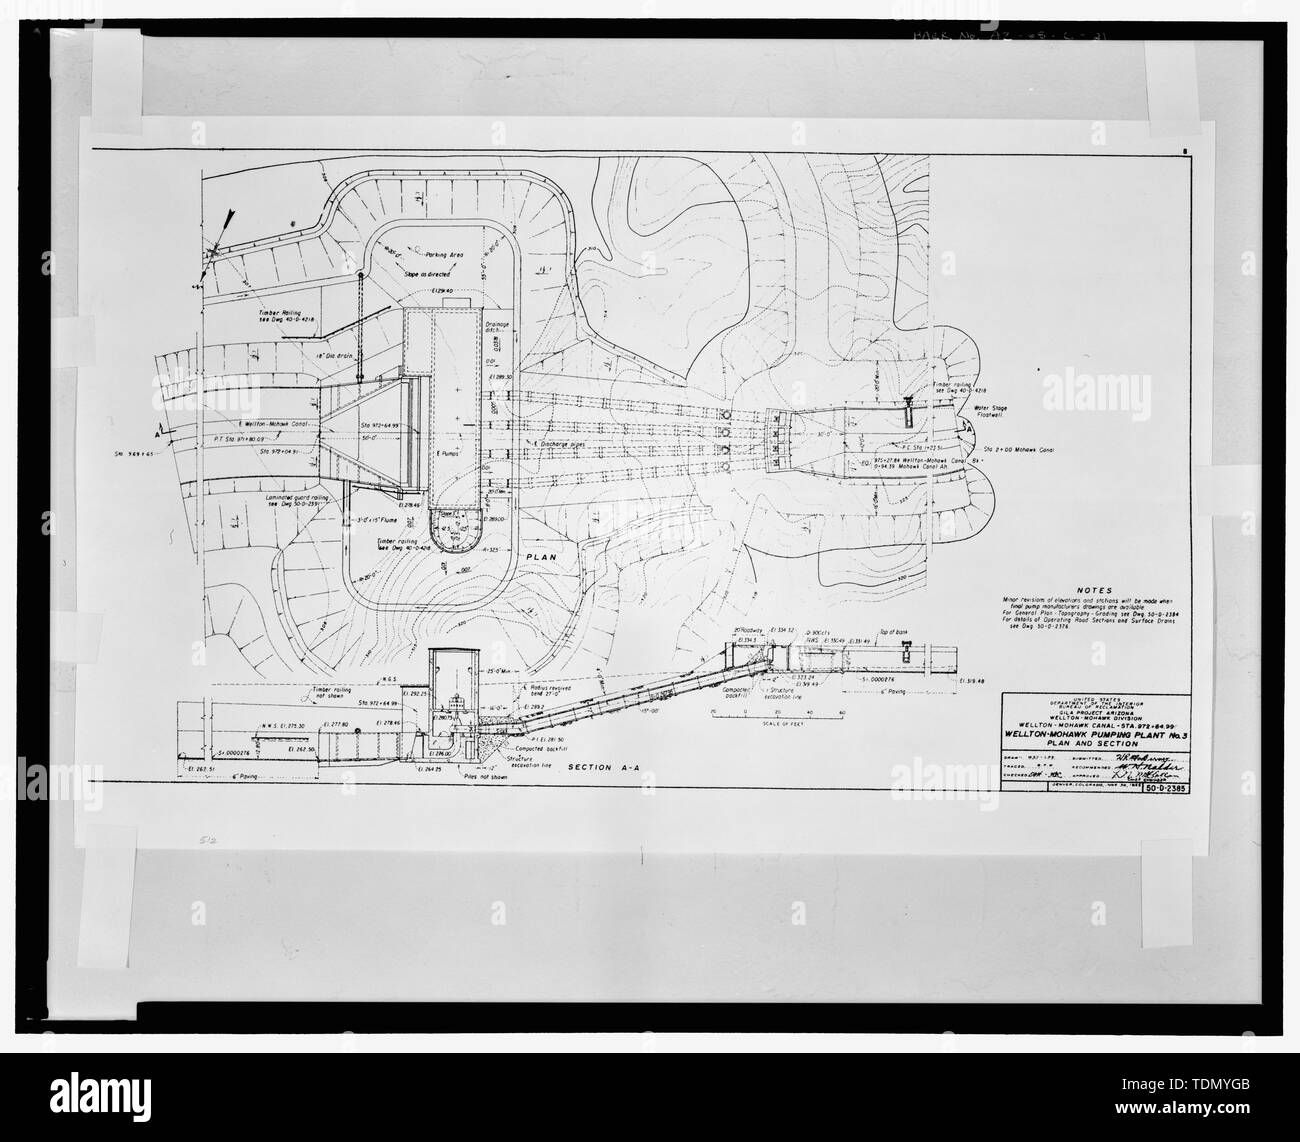 PLAN AND SECTION. WELLTON-MOHAWK PUMPING PLANT NO. 3. WELLTON-MOHAWK CANAL - STA. 972-64.99. United States Department of the Interior, Bureau of Reclamation; Gila Project, Arizona, Wellton-Mohawk Division. Drawing No. 50-D-2385, dated June 30, 1948, Denver, Colorado - Wellton-Mohawk Irrigation System, Pumping Plant No. 3, South of Interstate 8, Wellton, Yuma County, AZ Stock Photo